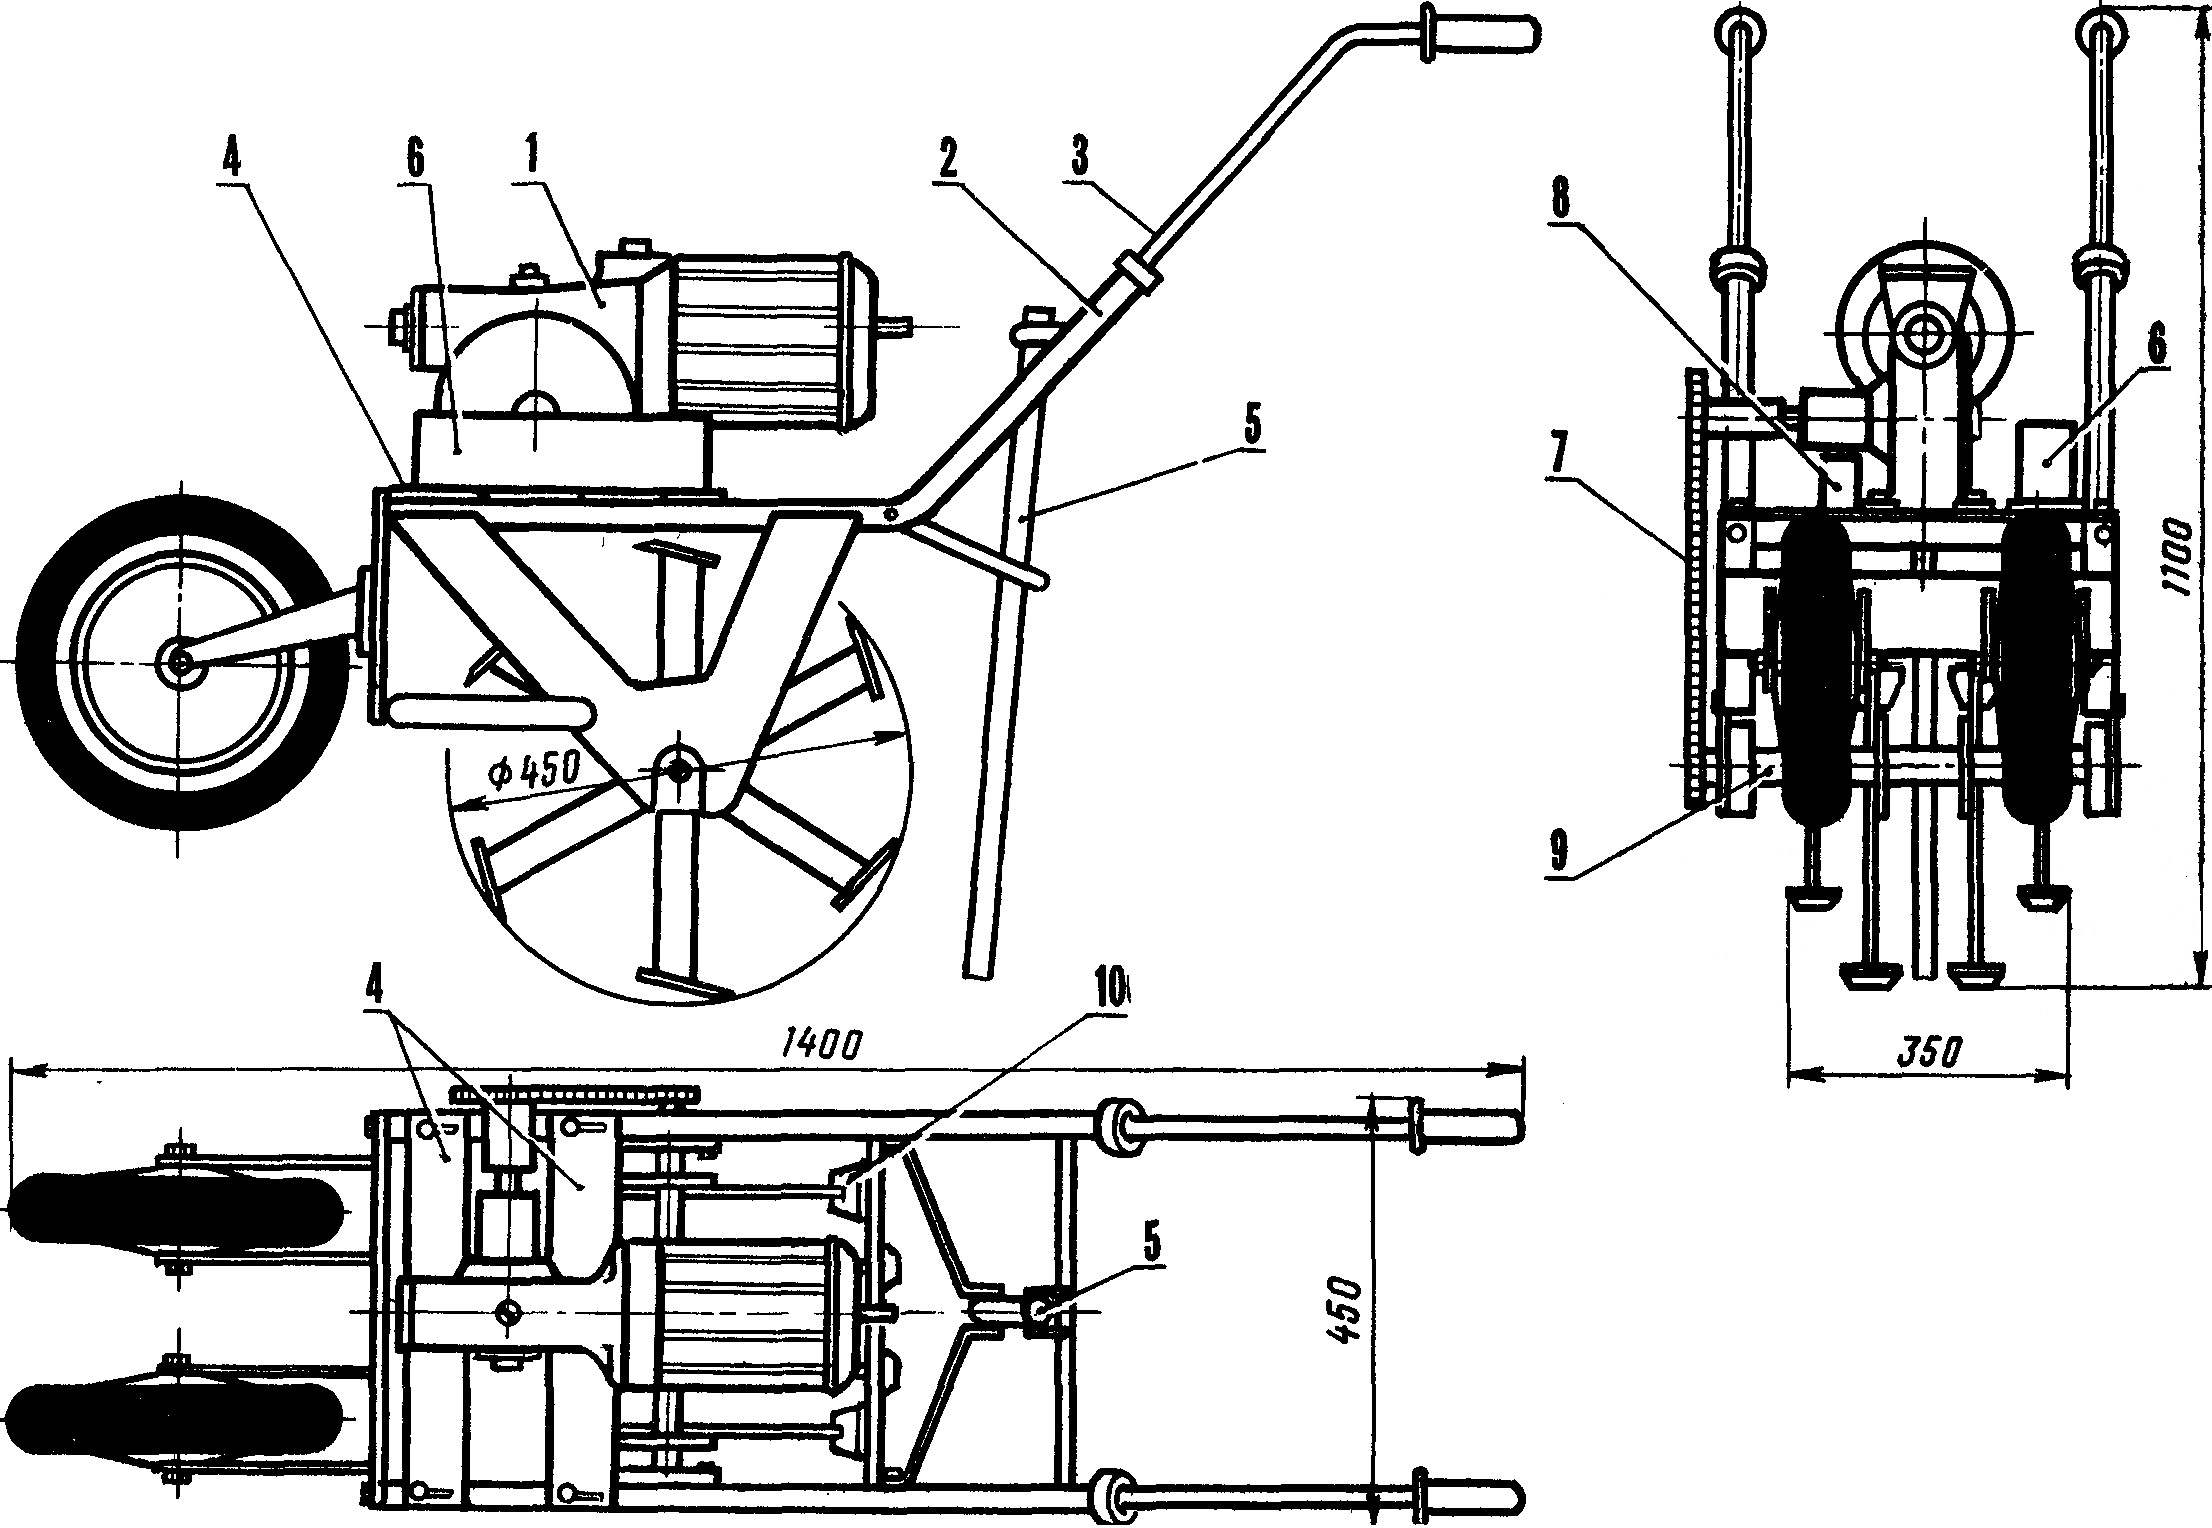 Fig. 1. Electrofresh Assembly.